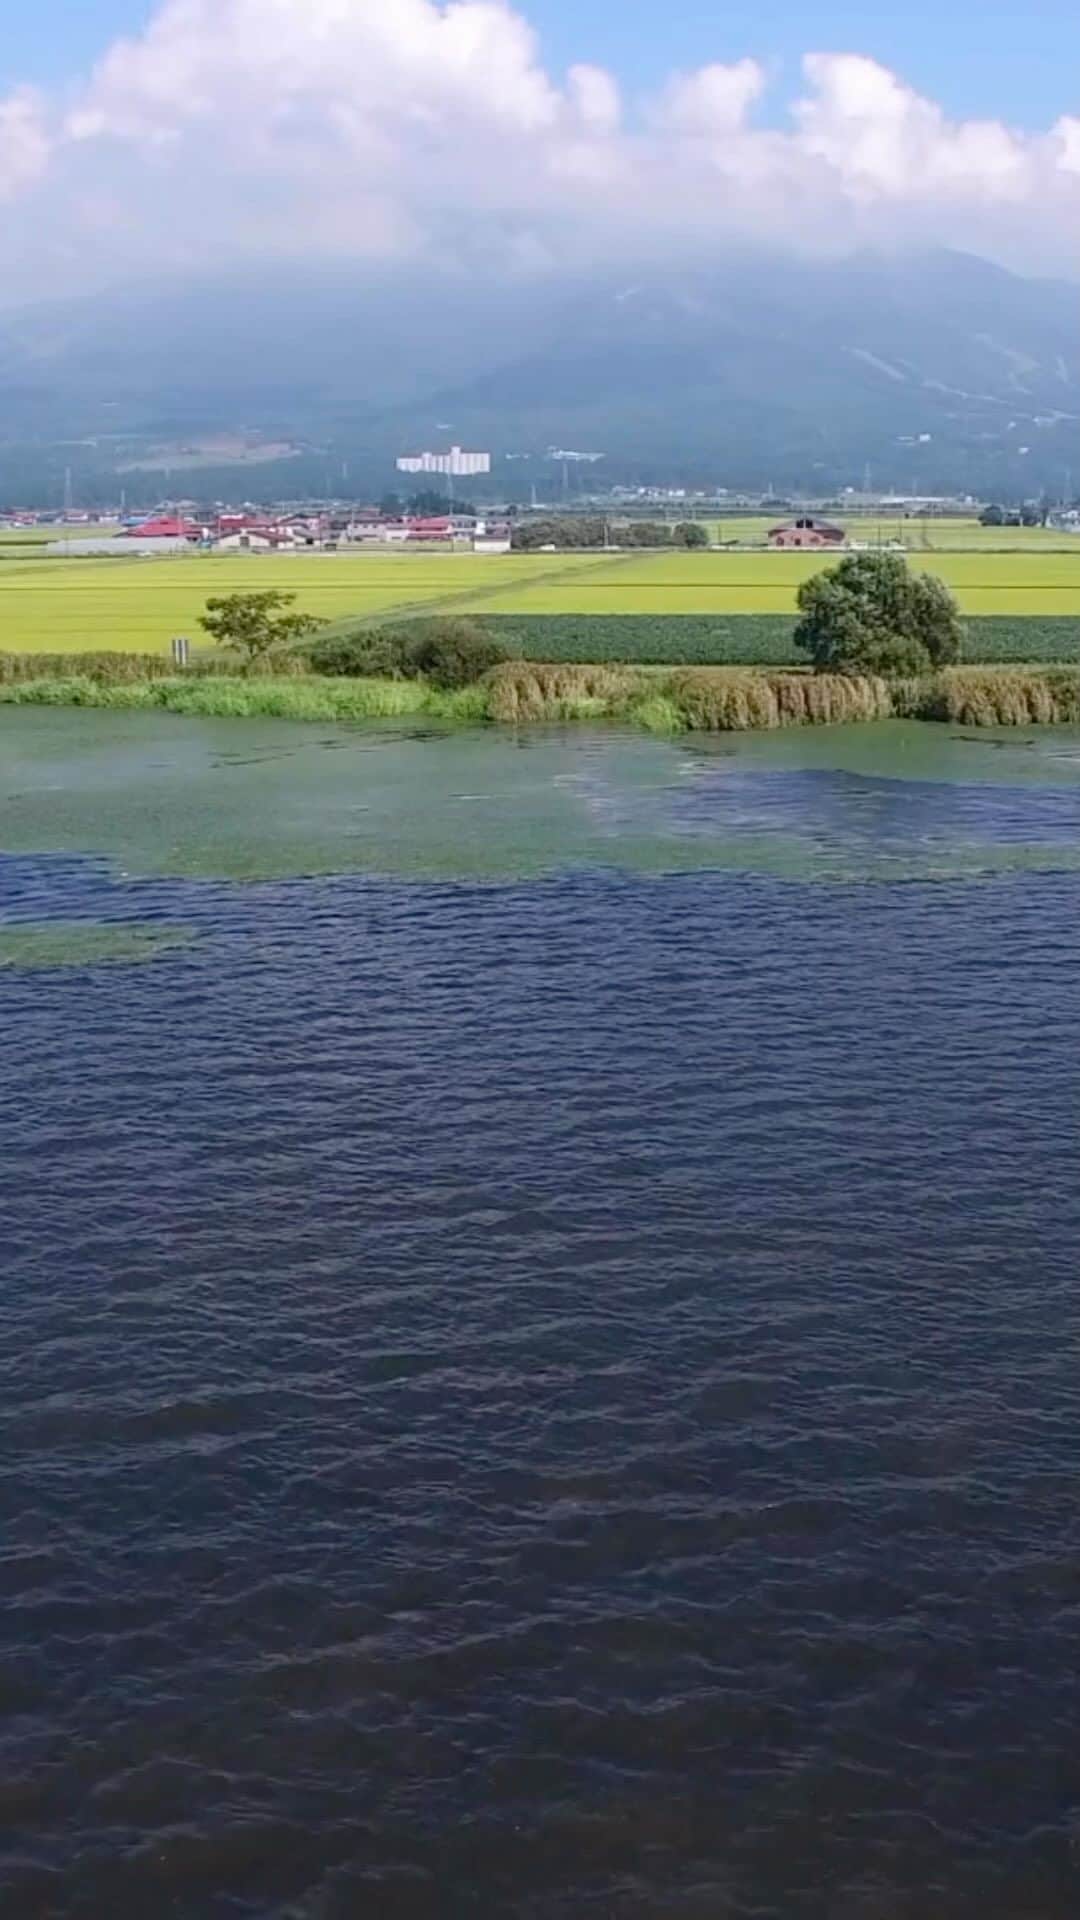 Rediscover Fukushimaのインスタグラム：「Lake Inawashiro is the perfect place to refresh in the summer! 🌞  The warmer months are perfect for camping by the lakeshore and trying out marine sports. 🚣‍♂️  This video is from the Northern side of the lake.   🚉 The closest train station is Inawashiro Station (JR Ban-etsu West Line), which can be reached directly by train from Aizu-Wakamatsu Station or Koriyama Station.  From Inawashiro Station, the northern side of the lake is a 5km~7km walk, or a taxi ride away.  🚗 By car, the northern side of the lake can be reached in around 45 minutes from either Koriyama City or Aizu-Wakamatsu City.  Read more about Lake Inawashiro and summer activities in Inawashiro town on our website. 🥰  What’s your favorite season to visit Lake Inawashiro?  #fukushima #visitfukushima #inawashiro #visitjapan #japantravel #beautiful #beautifuljapan #japanlandscapes #inawashirolake #japanreels #fukushimareels #aizu #nature #dronevideo #summer #lakelife #nature #naturelovers #outdoorliving #camping #campinginjapan #japancamping #outdoors #bandai #summervibes #summerinjapan #tohokutrip #tohoku #猪苗代 #夏旅 #福島」